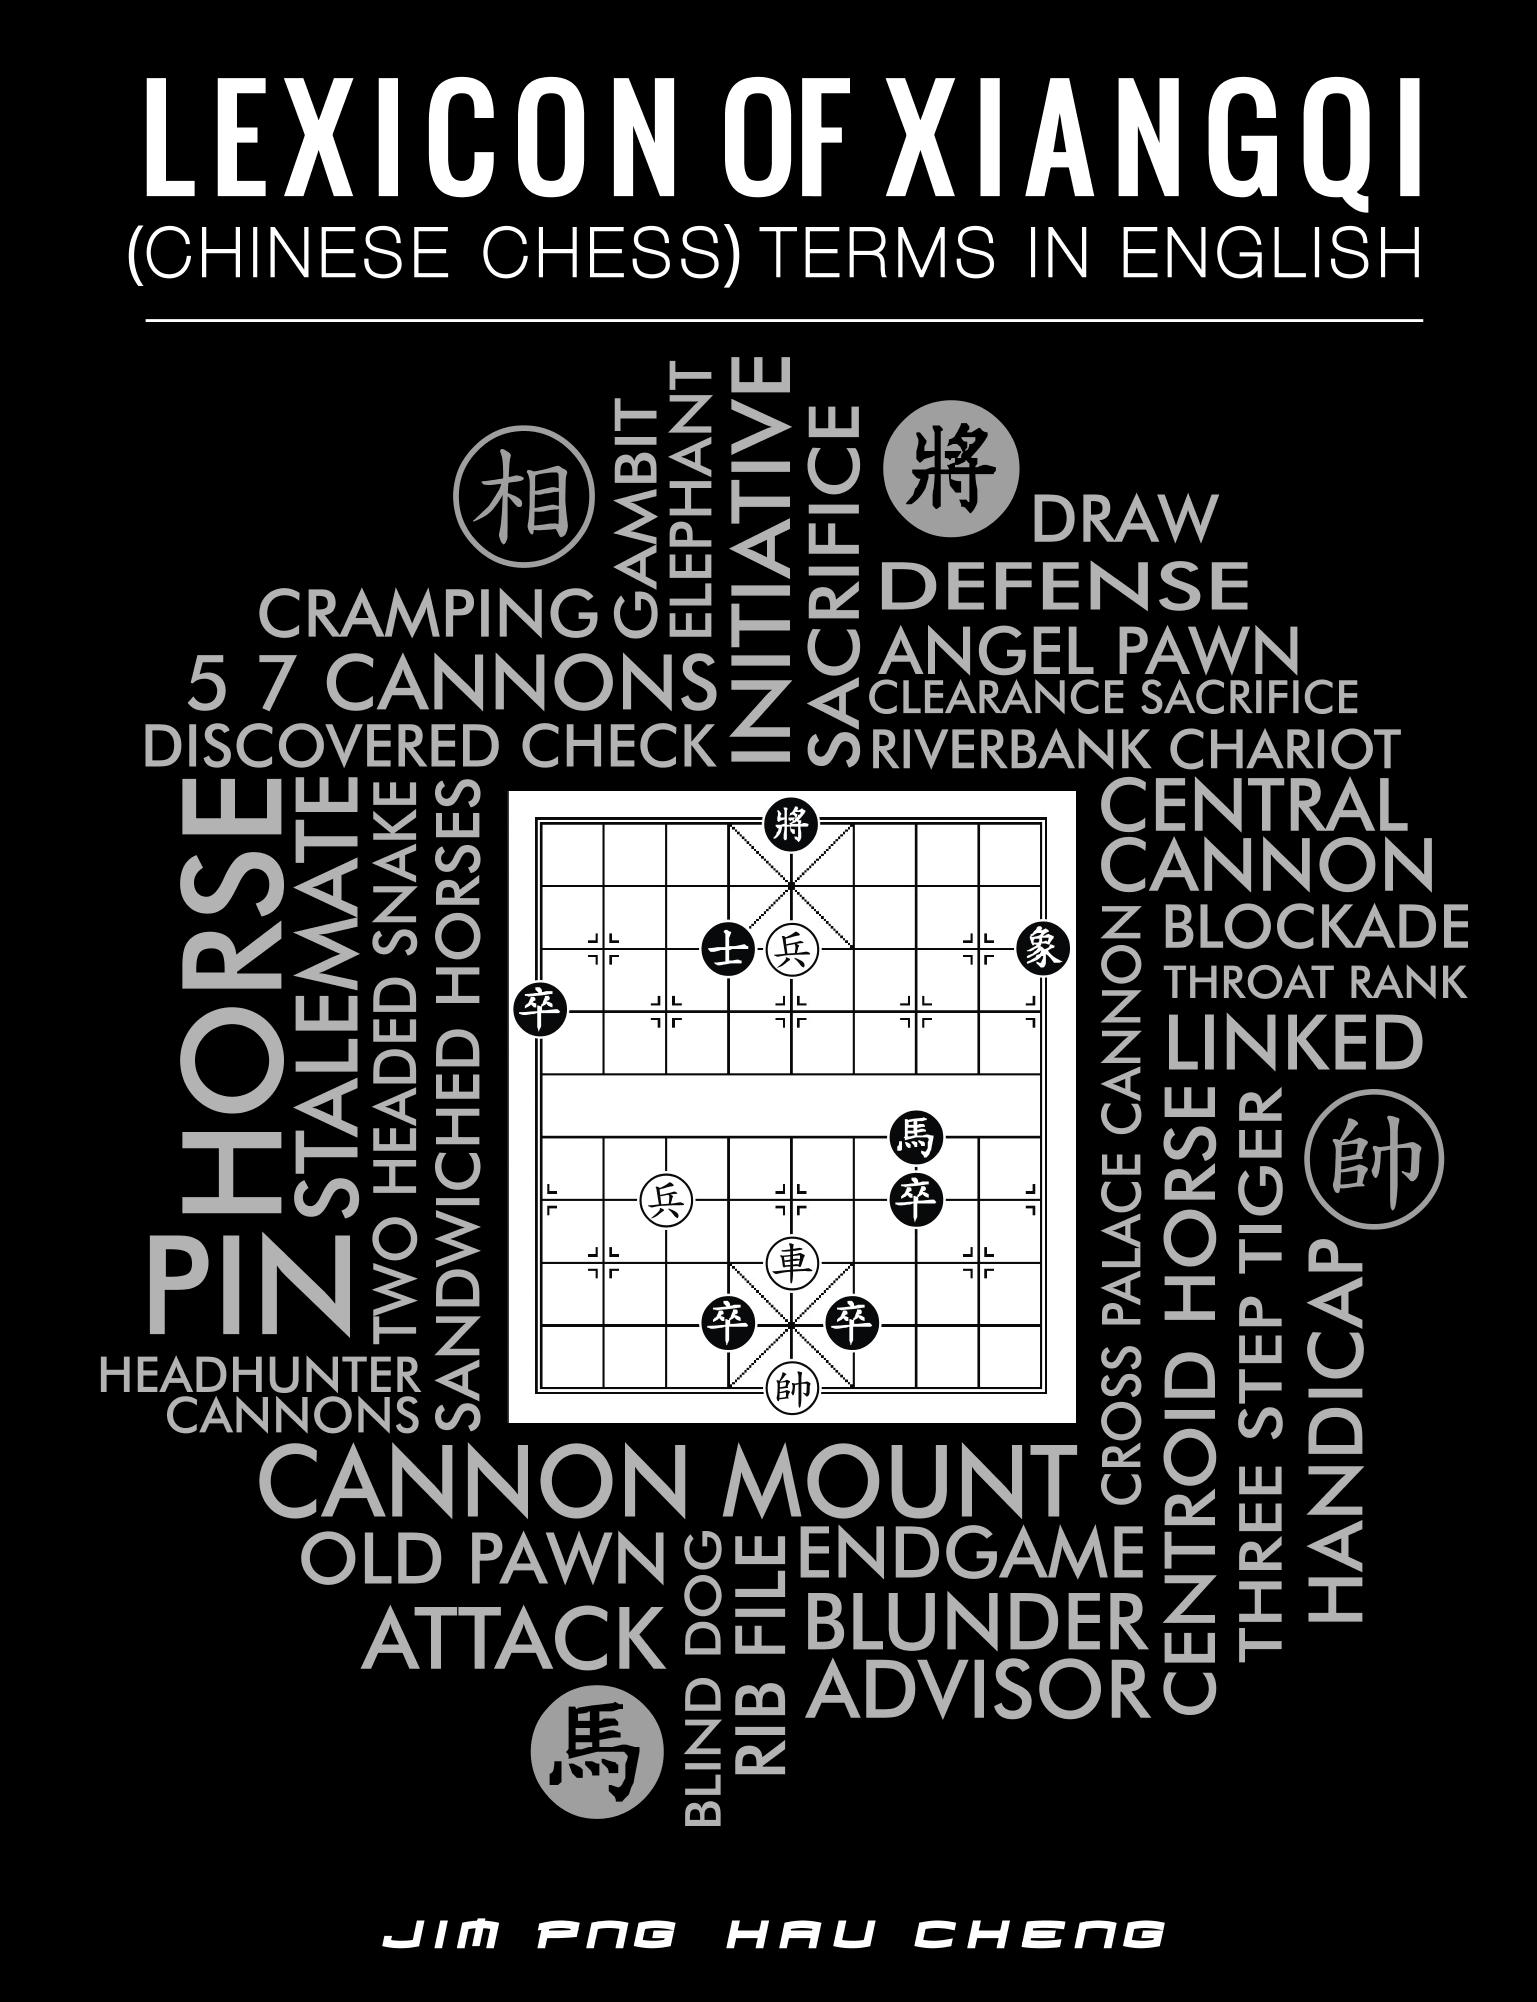 Lexicon of Xiangqi (Chinese Chess) Terms in English